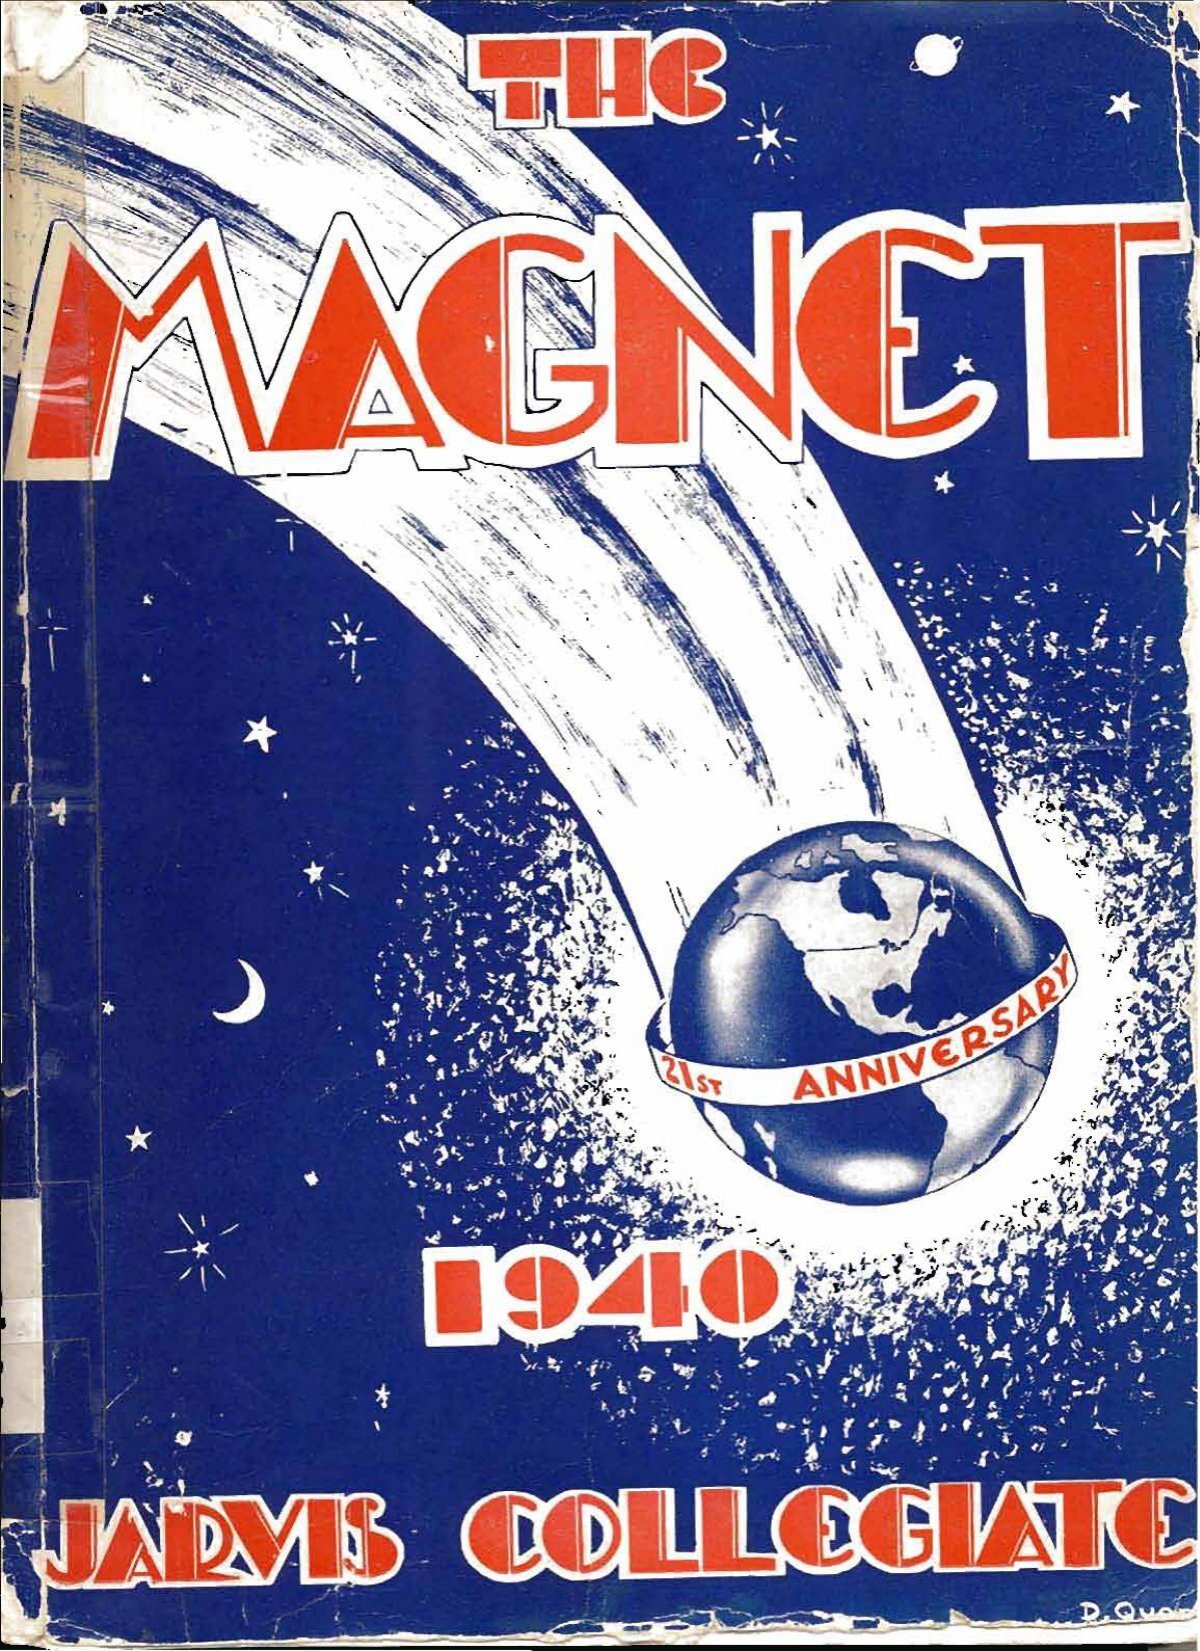 1940 Magnet Yearbook